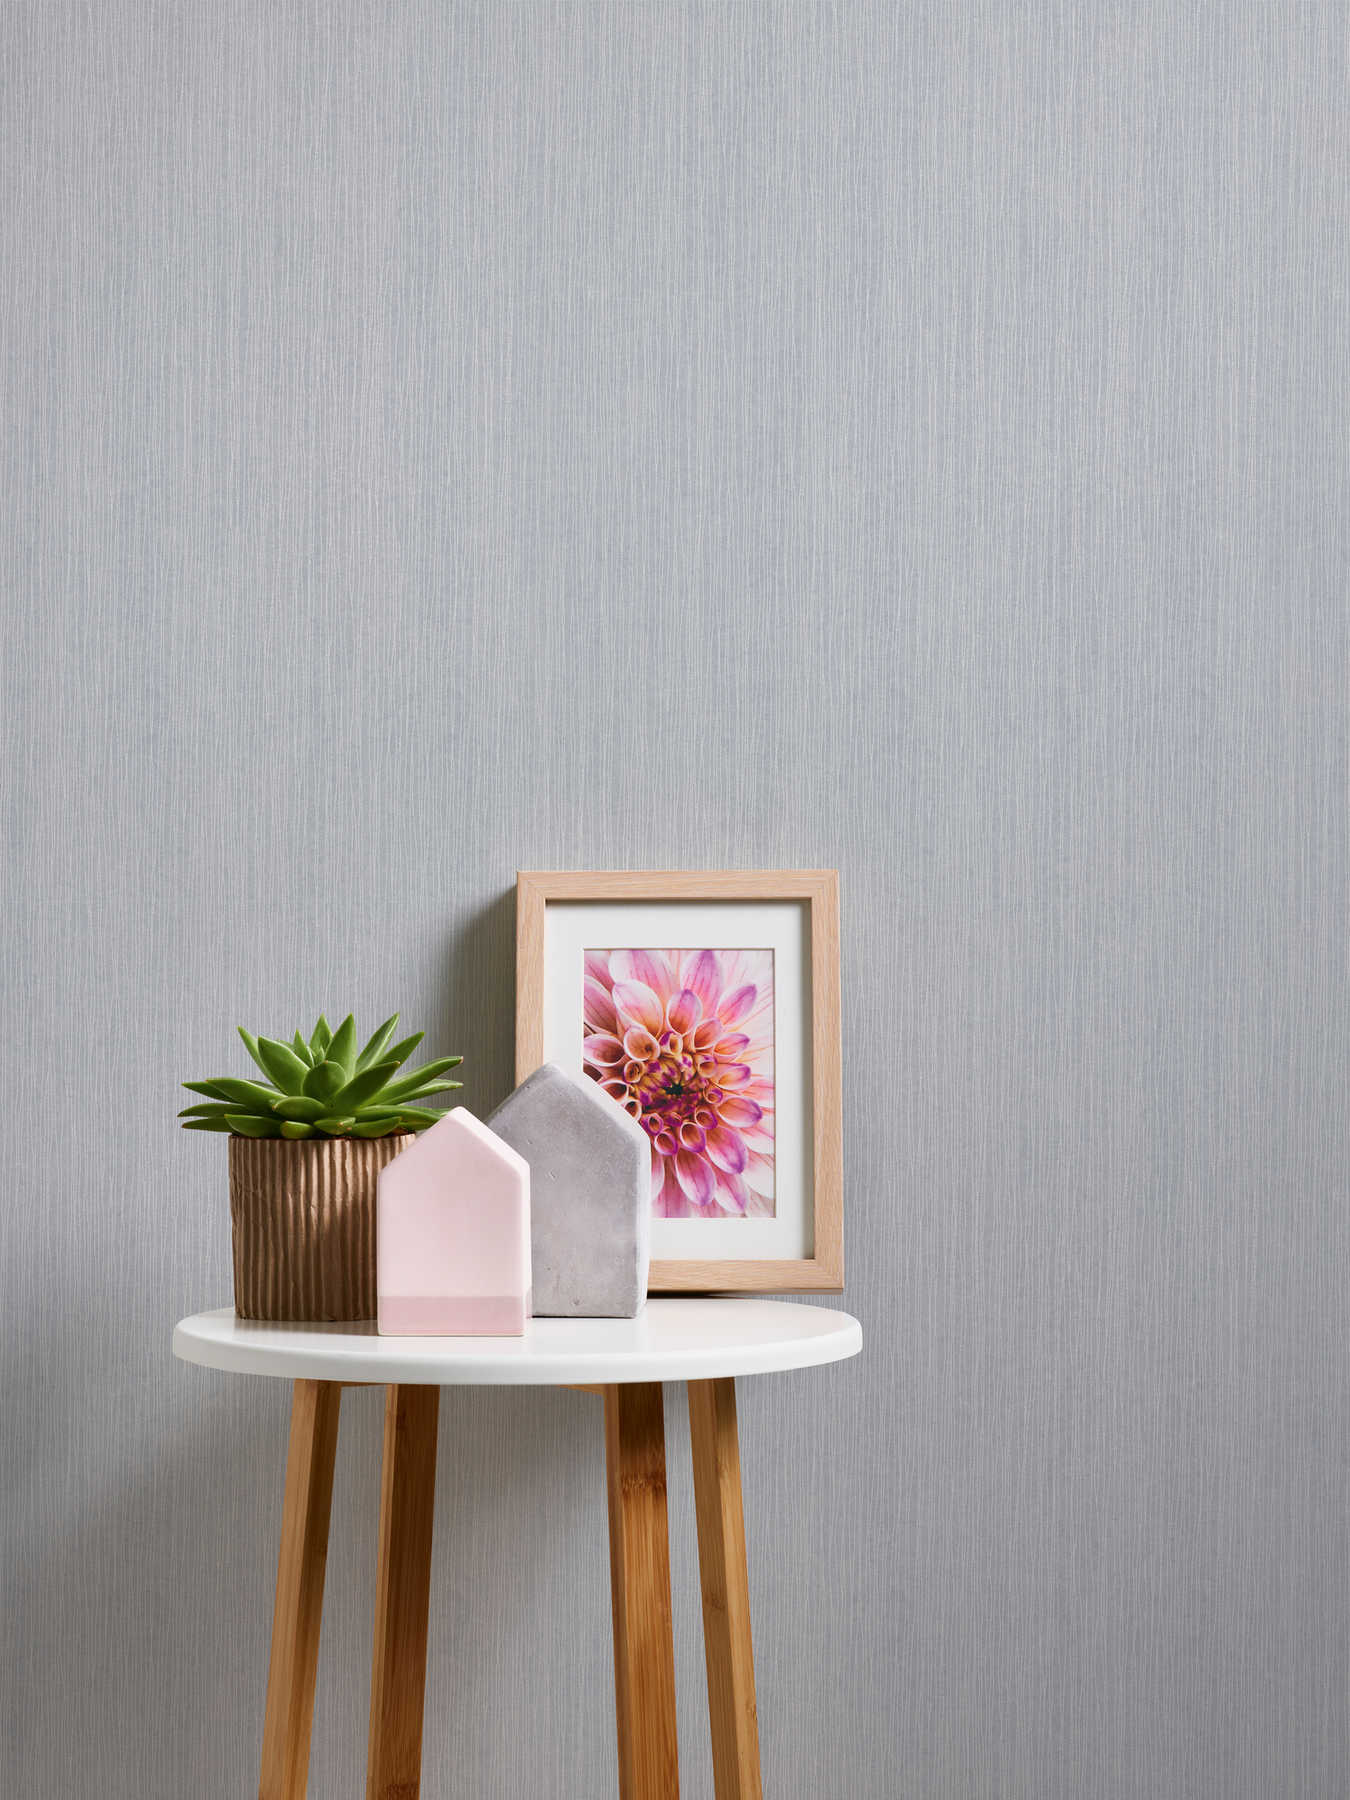             Paintable wallpaper non-woven with nature structure design
        